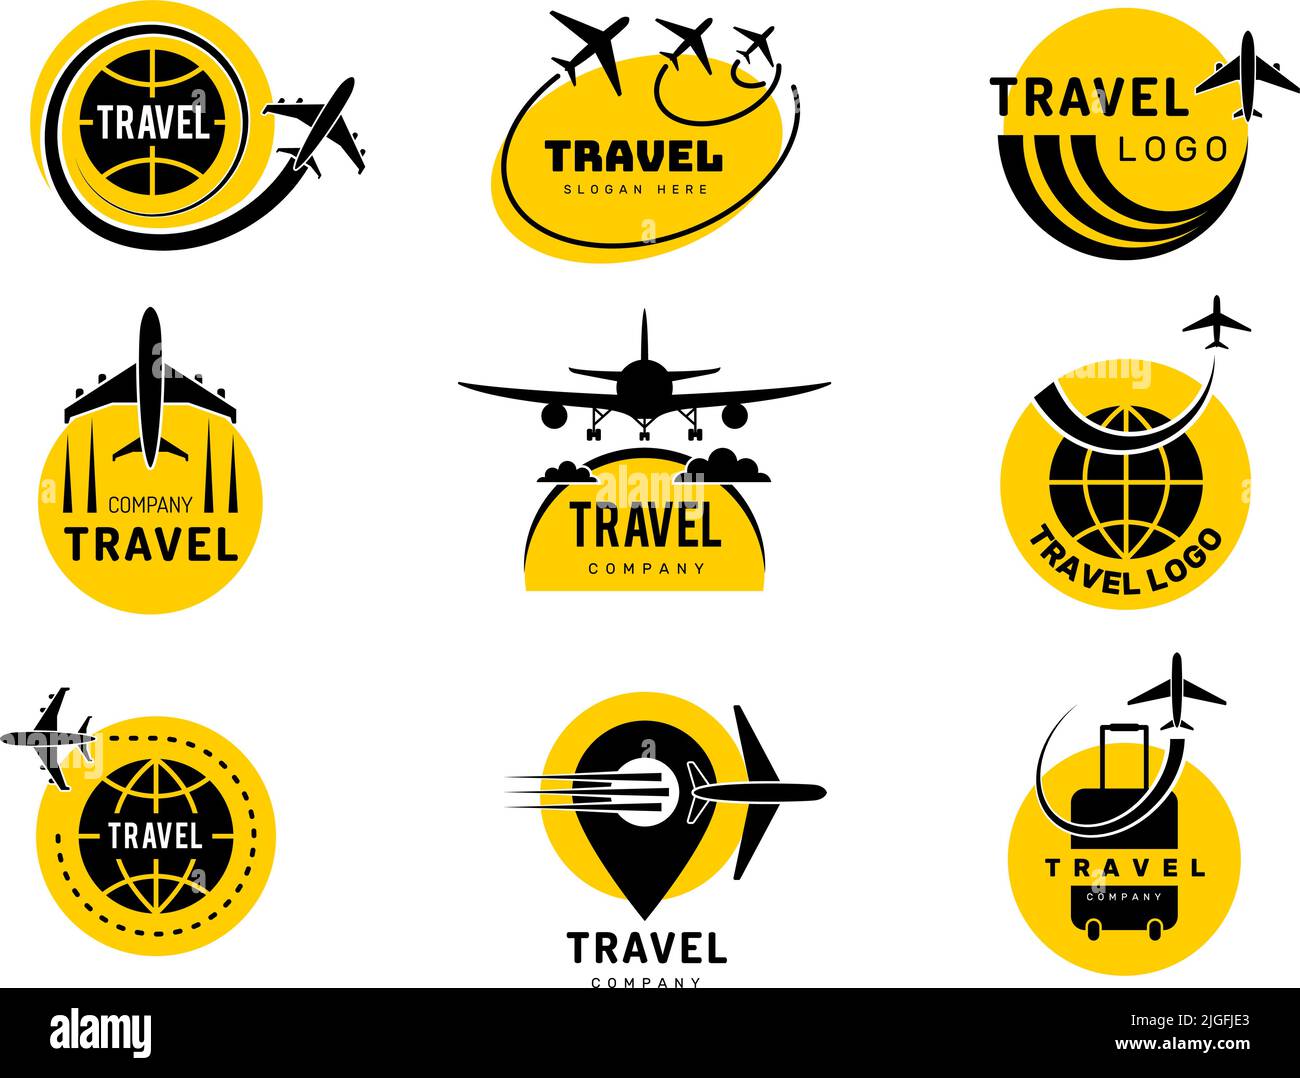 Travel logo. Adventure and exploration world concept identity for tourist agency air trip logotype recent vector templates Stock Vector